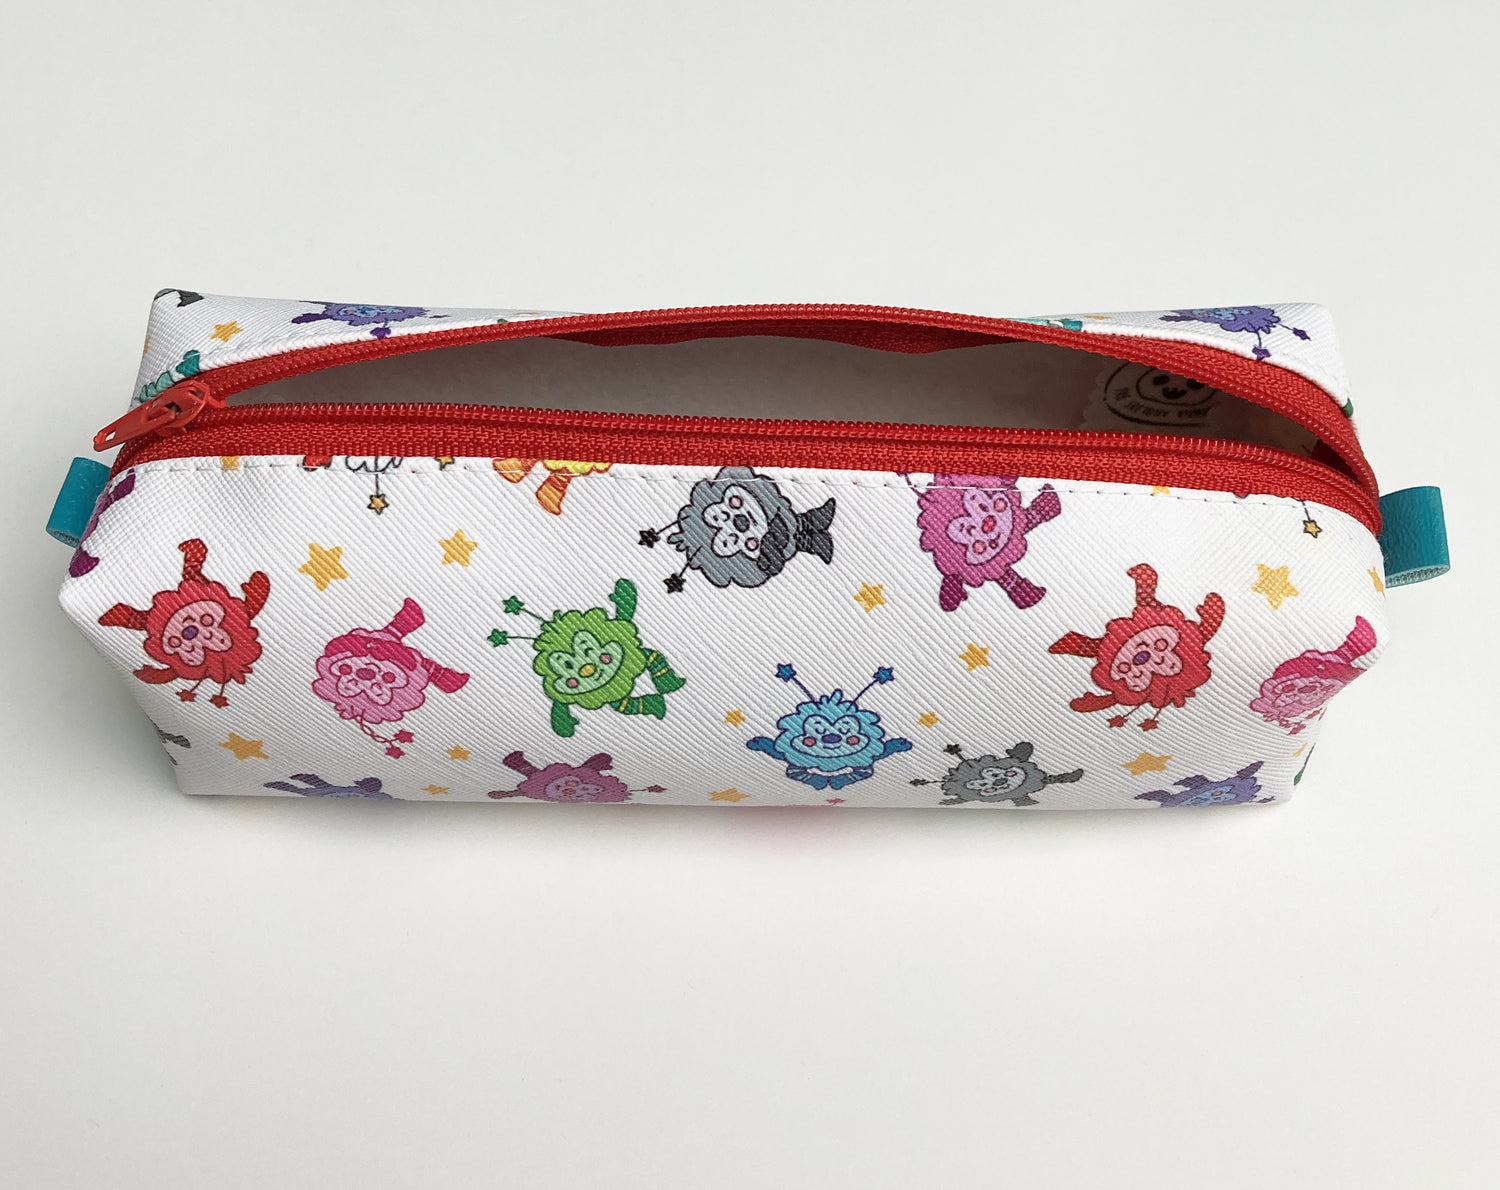 Rainbow Cute Pencil Case for Girls Kids Large Capacity Pencil